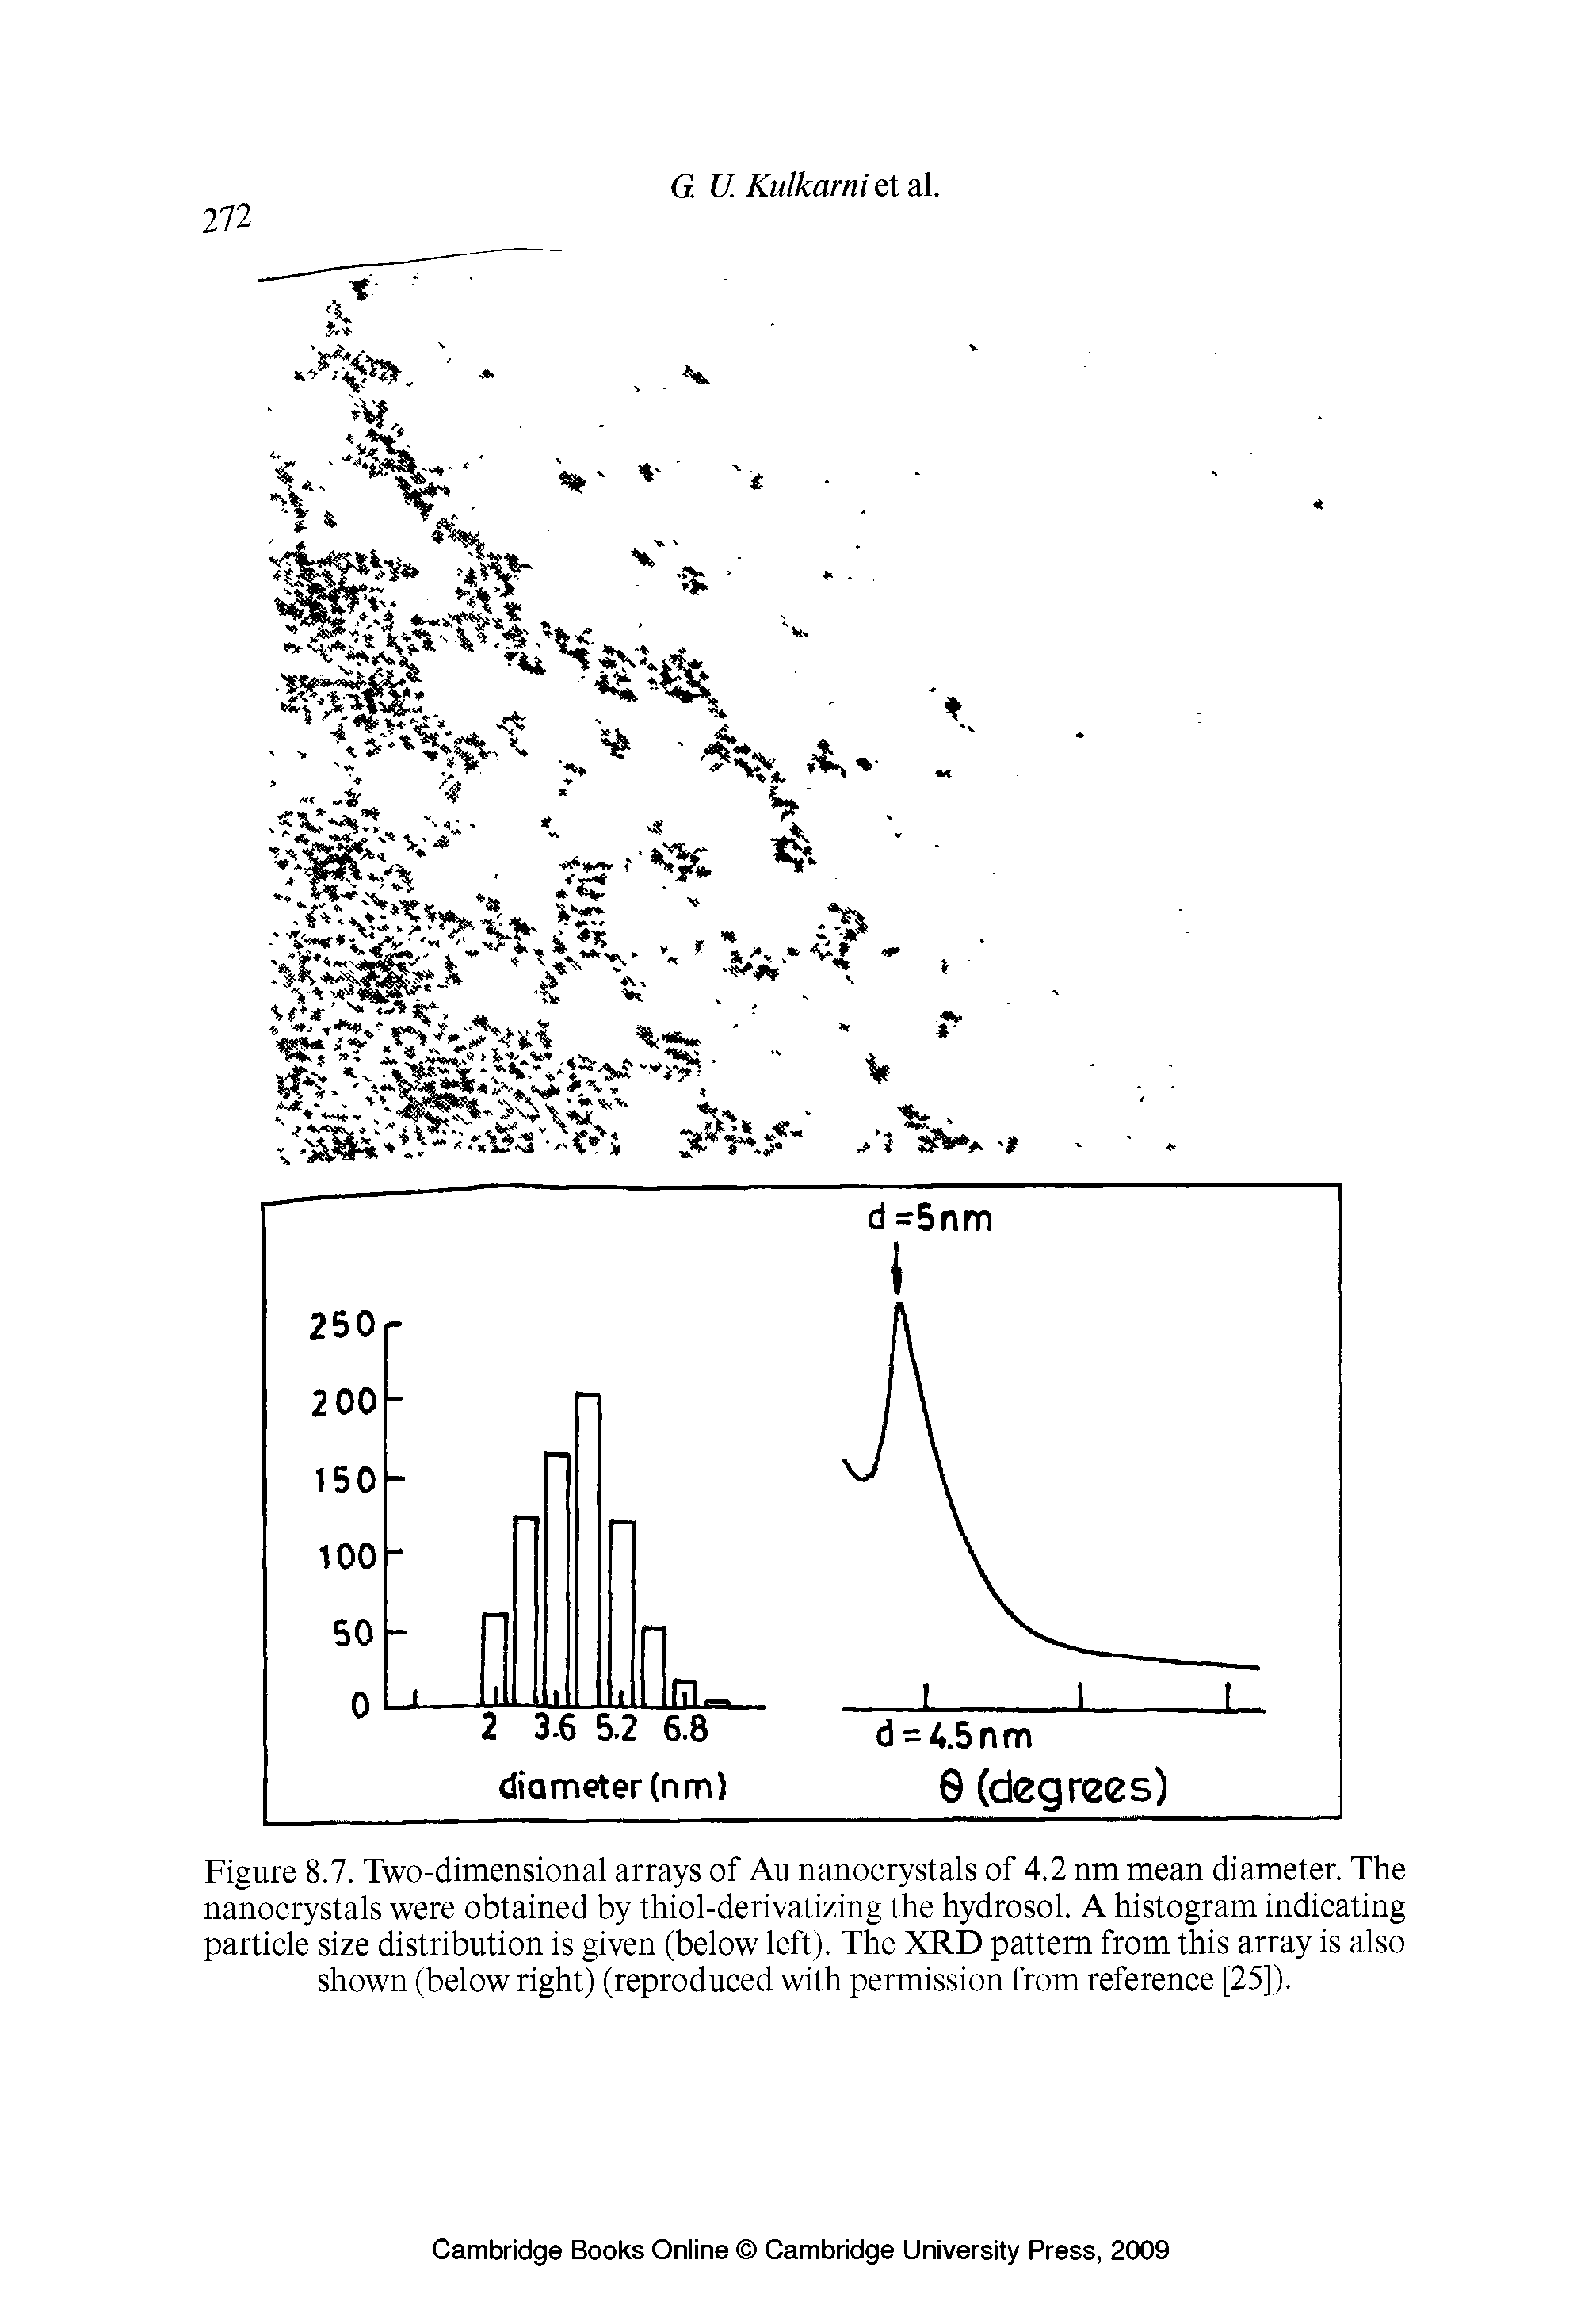 Figure 8.7. Two-dimensional arrays of Au nanocrystals of 4.2 nm mean diameter. The nanocrystals were obtained by thiol-derivatizing the hydrosol. A histogram indicating particle size distribution is given (below left). The XRD pattern from this array is also shown (below right) (reproduced with permission from reference [25]).